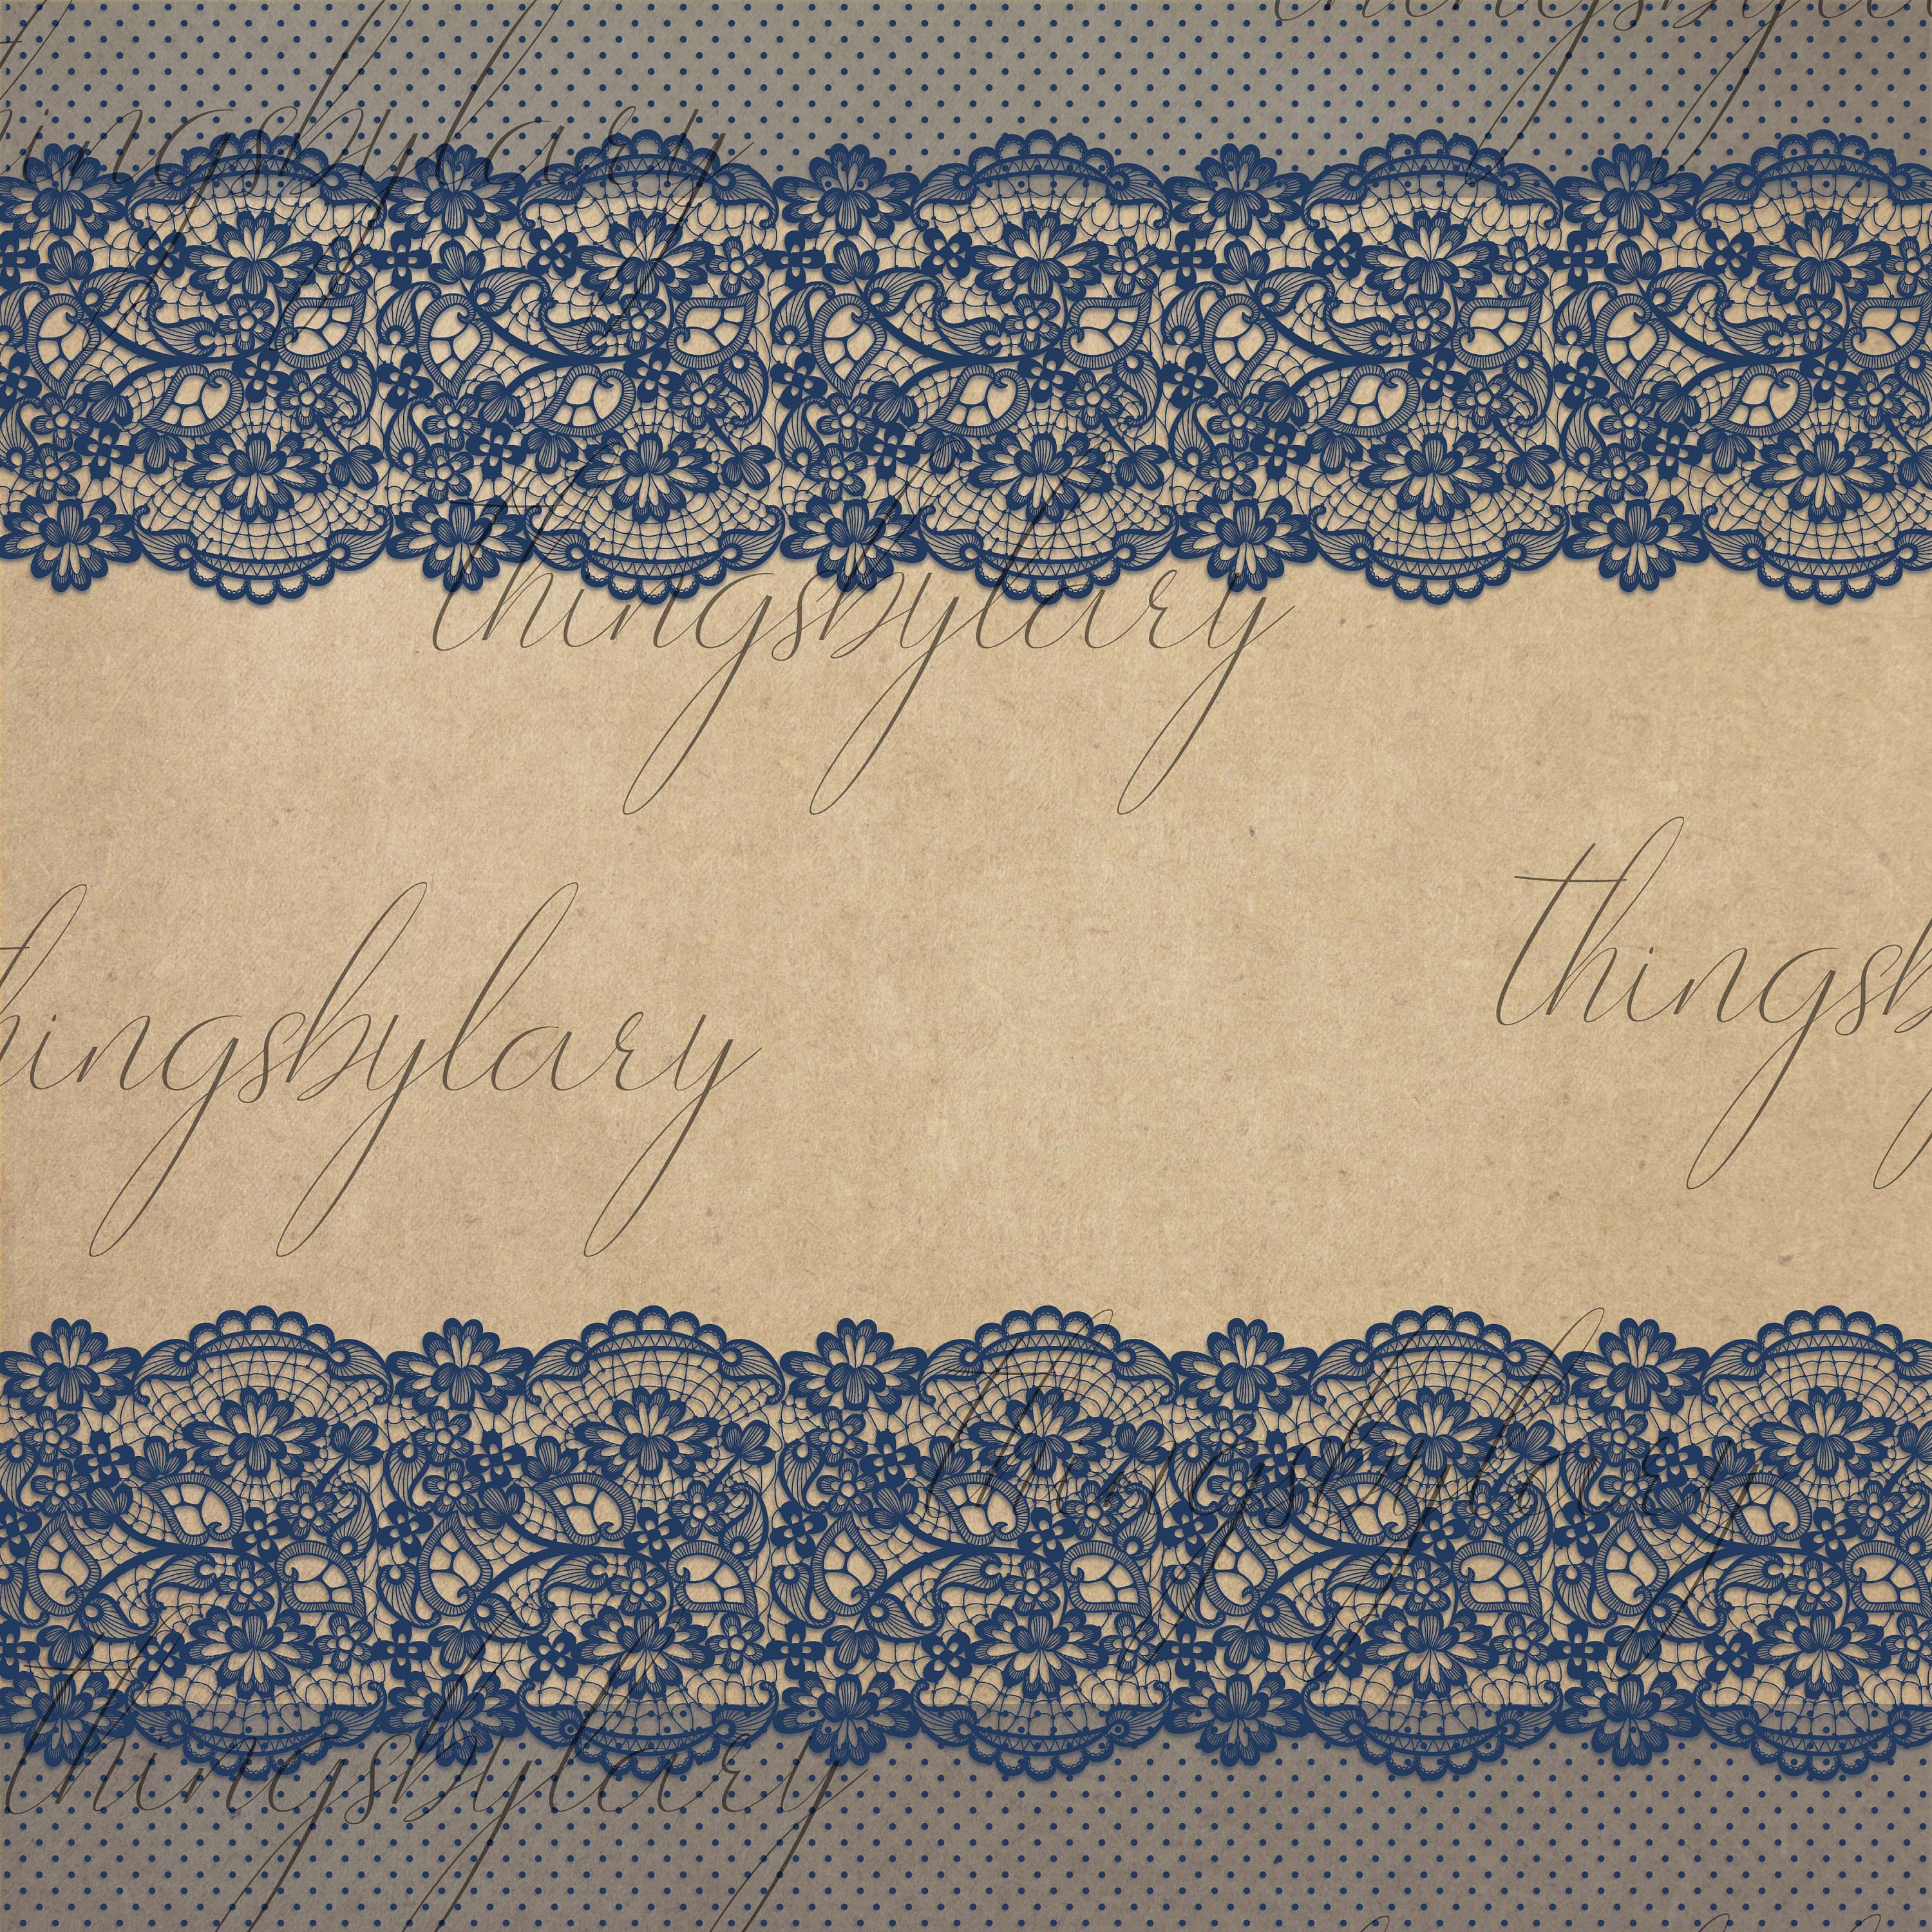 27 Navy Blue Lace Overlays Borders Frames Images PNG Transparent 300 Dpi Instant Download Commercial Use Shabby Chic Wedding Romantic Lacy